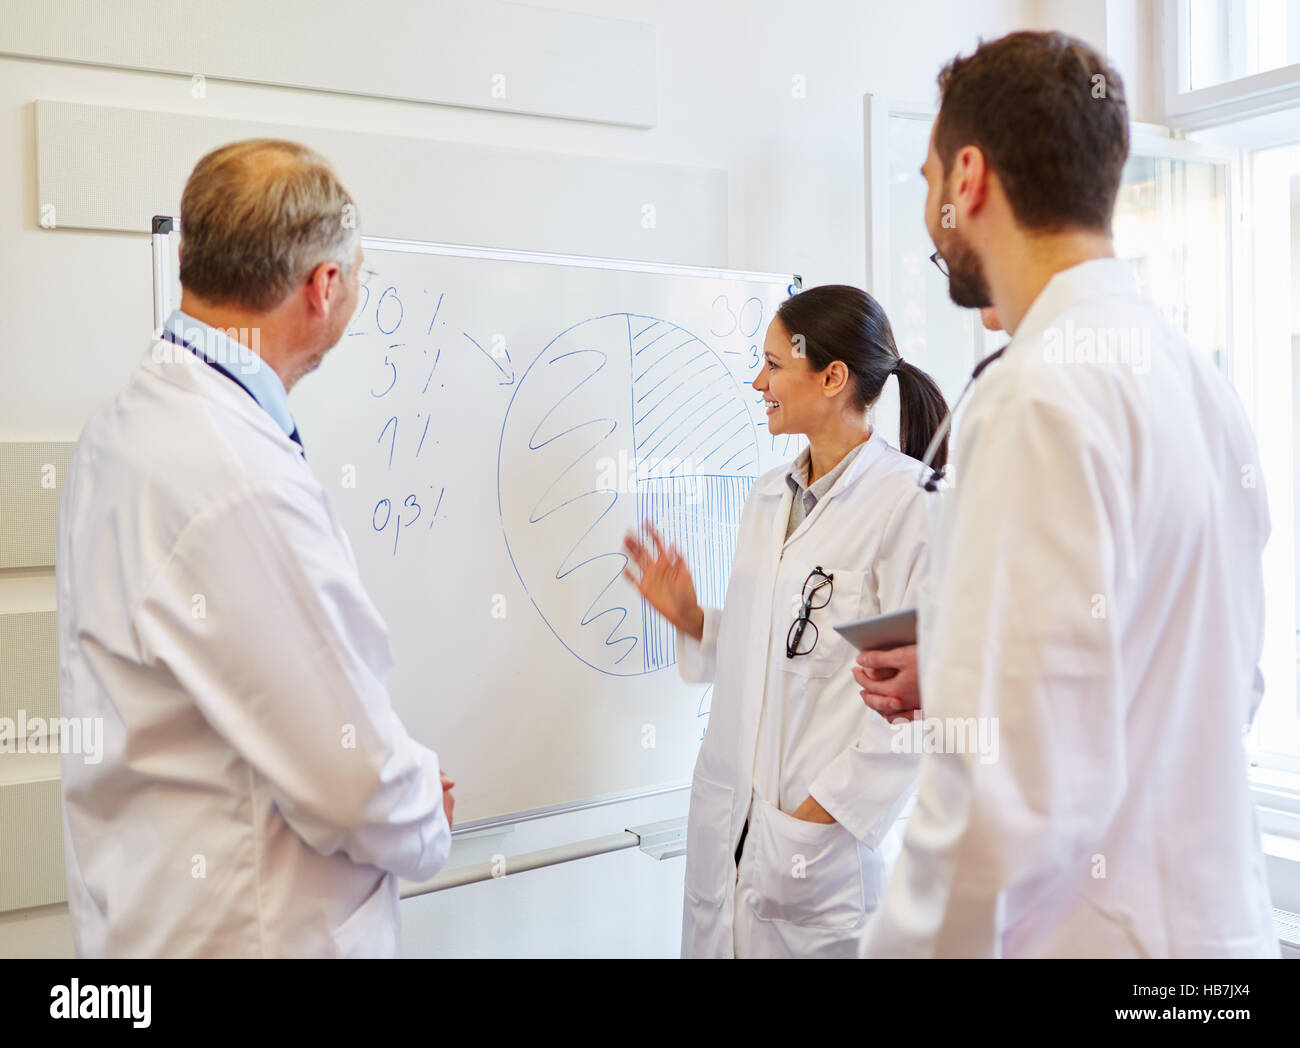 Doctor makes medical presentation with flipchart and statistics Stock Photo